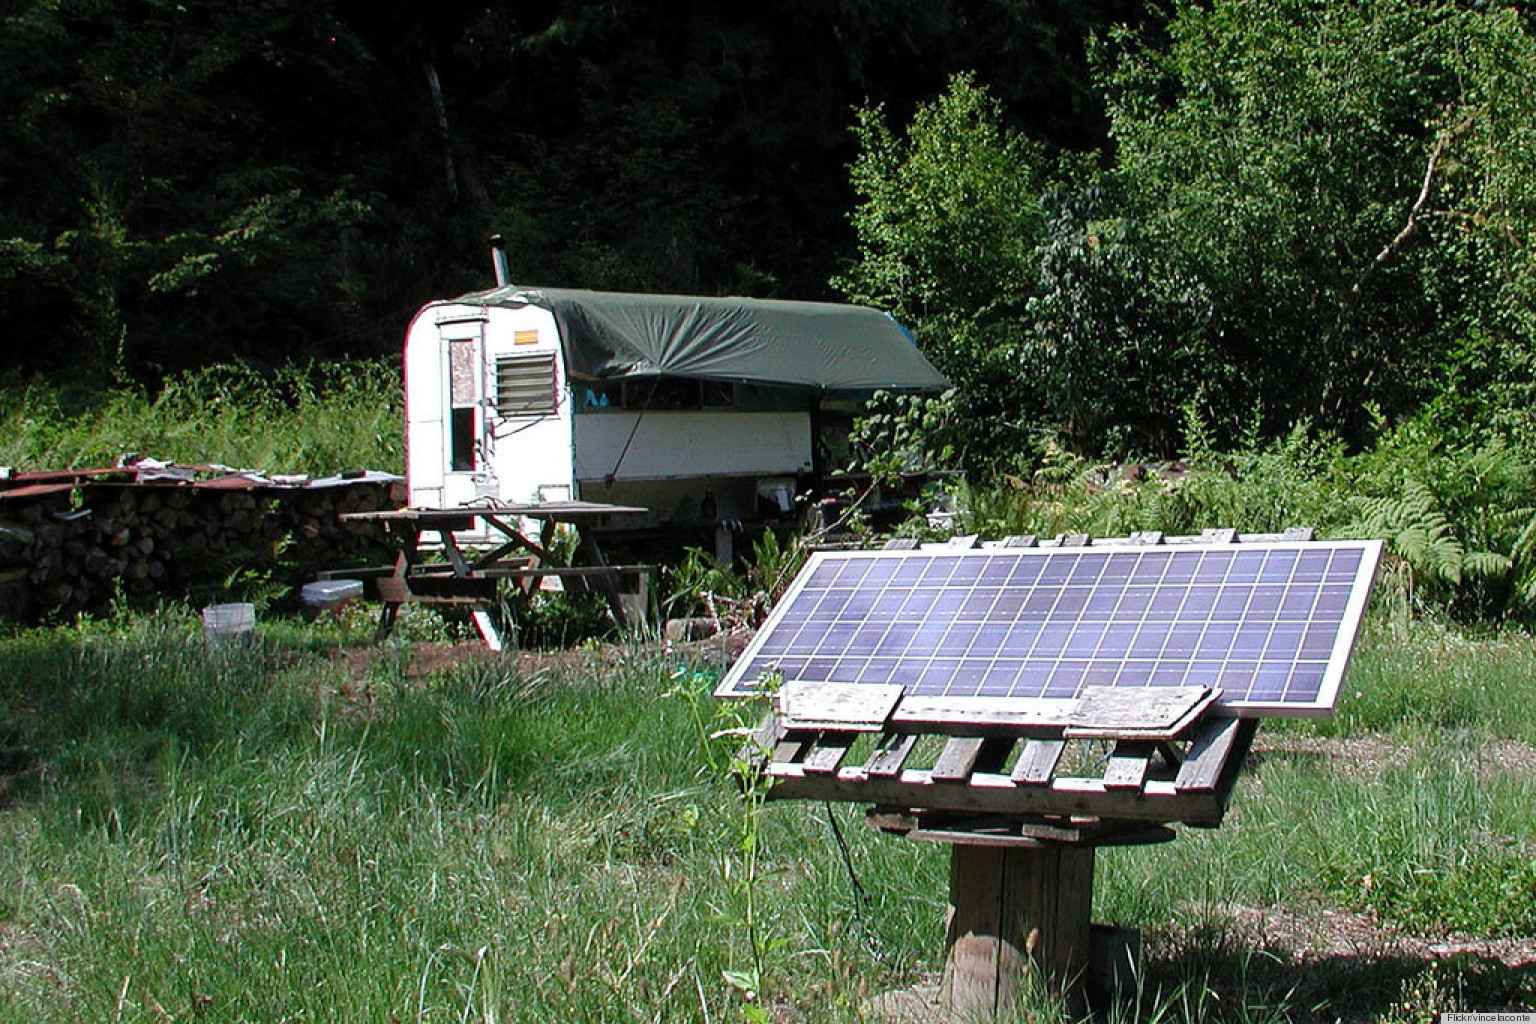 Living Off The Grid: Could Decreasing Energy Dependence Ultimately Make